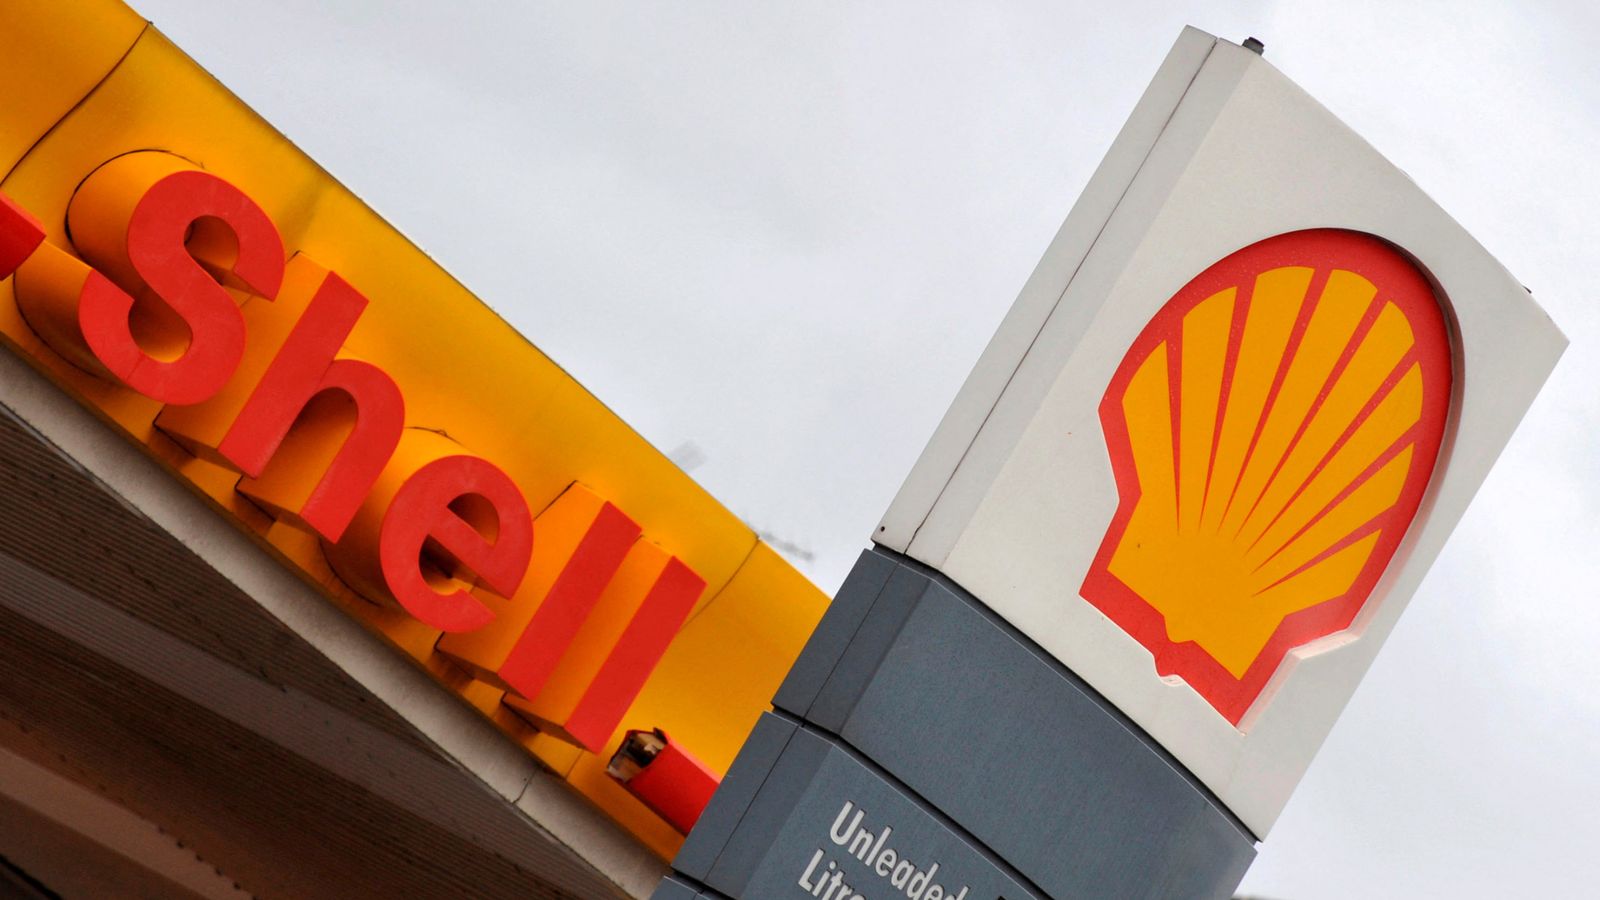 Energy company Shell reports profits of .5bn for Q3 of 2022 but not at record levels seen in first half of year